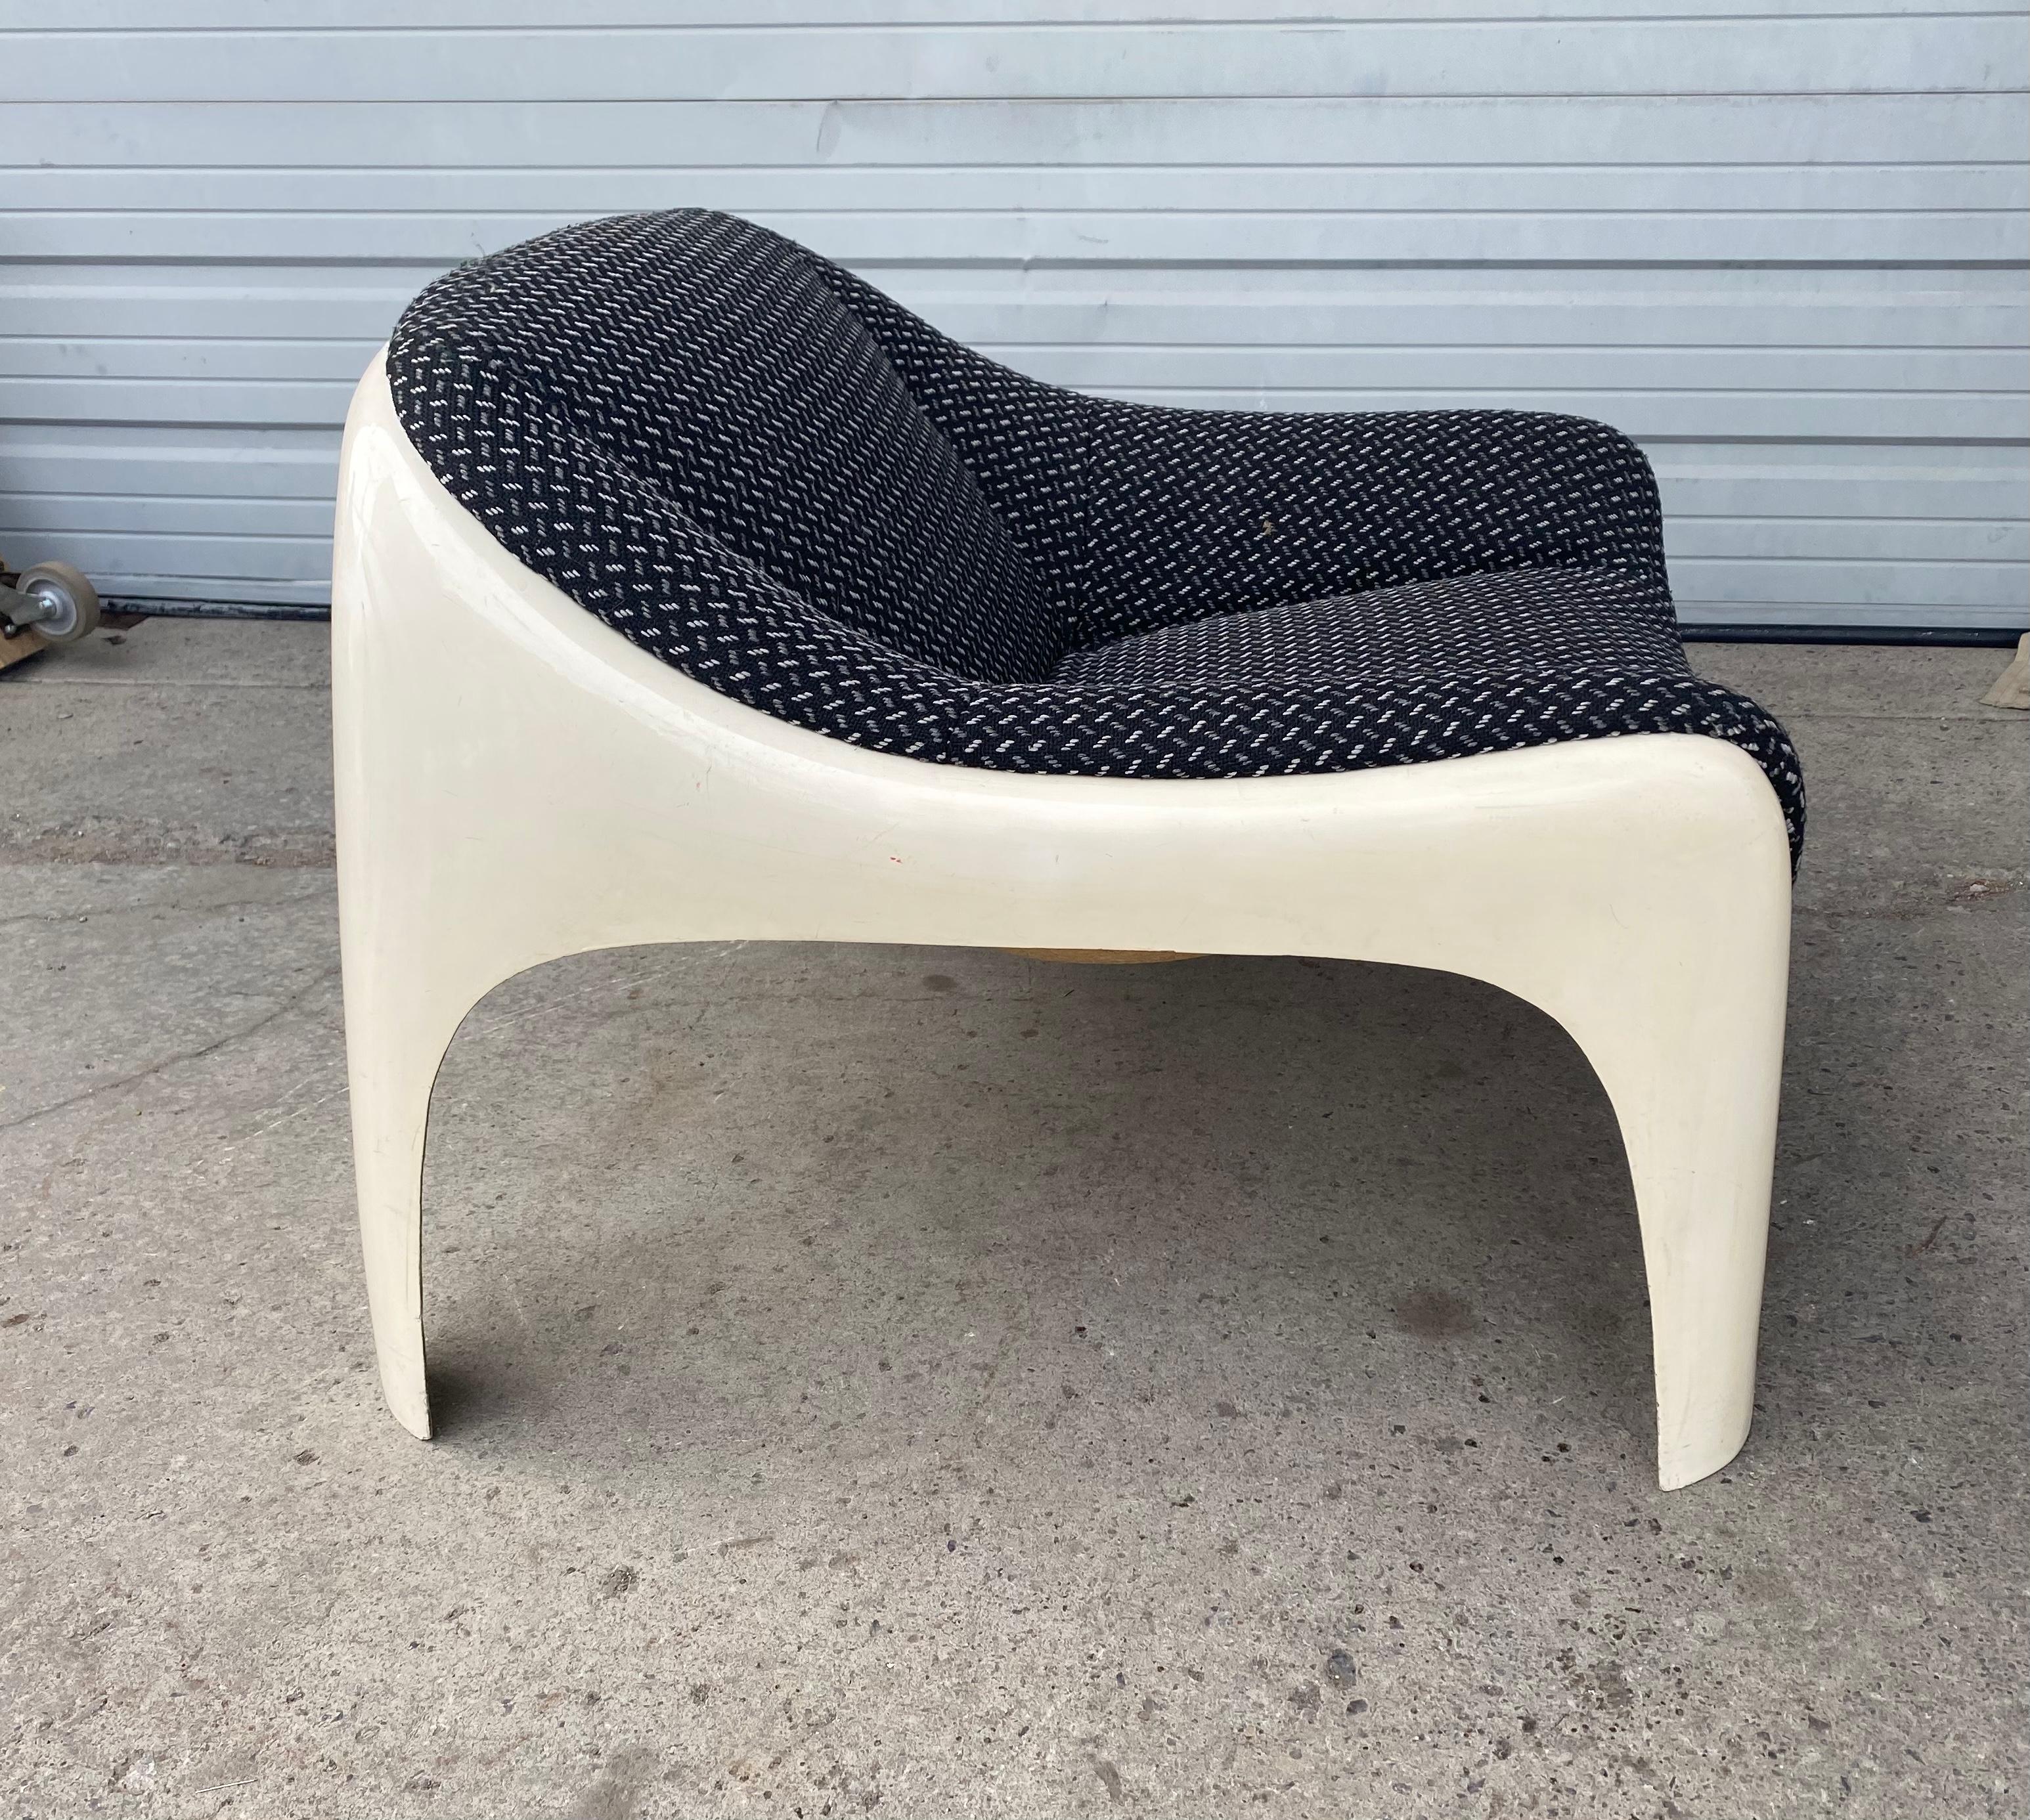 This seldom seen space age modernist lounge chair was designed by architect and Artemide co-founder, Sergio Mazza in the 1960s. The chair features a stunning white fiberglass frame with a removable upholstered black seat cushion.Amazing style and